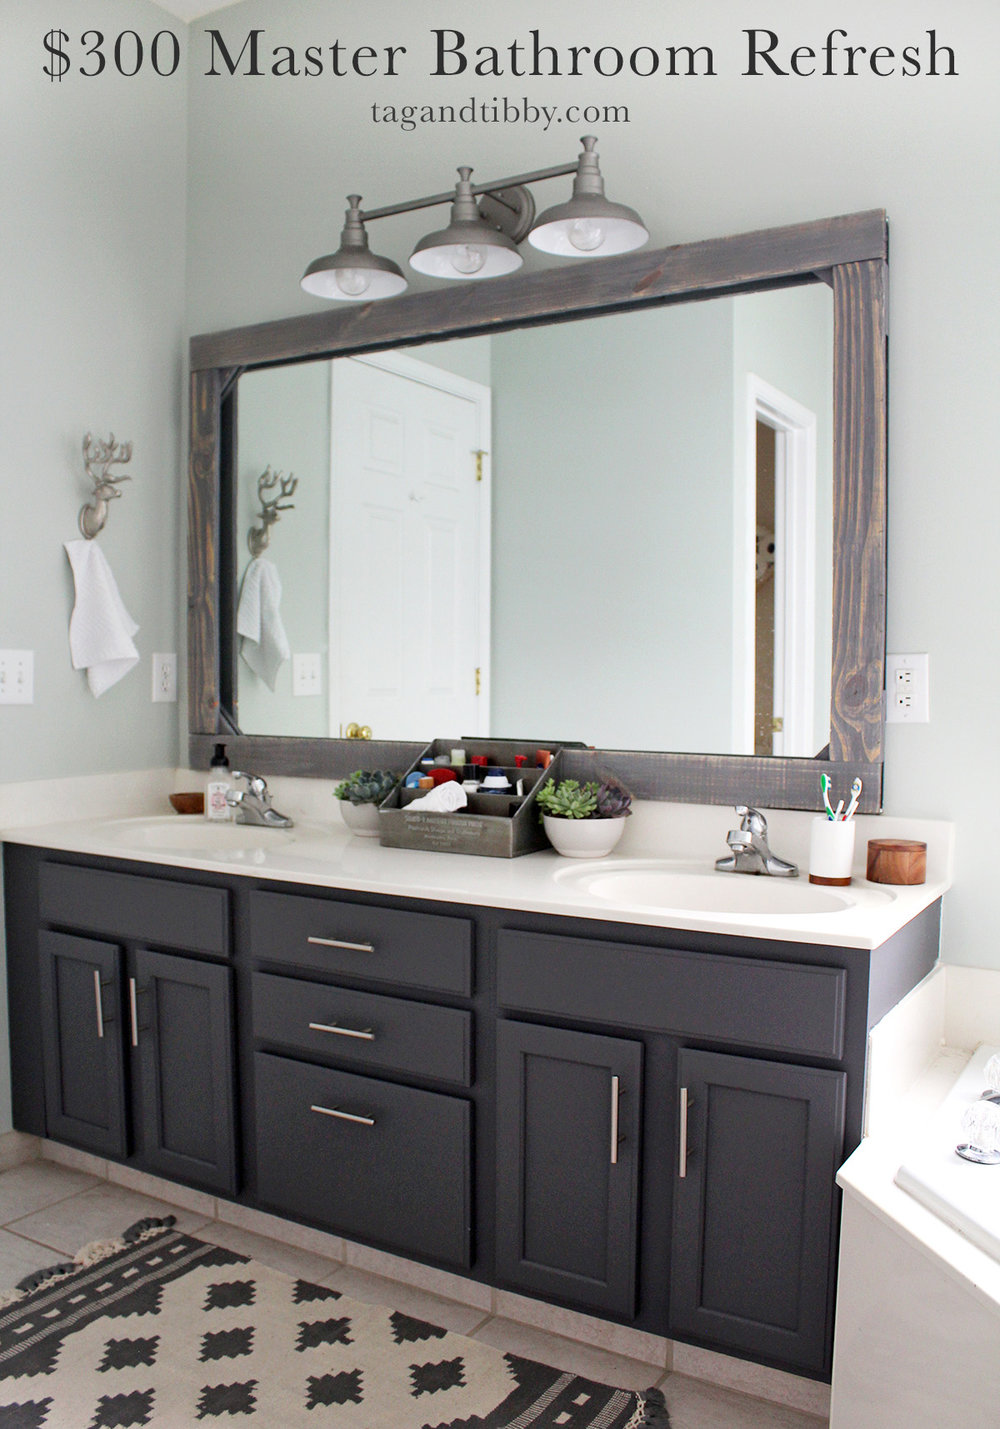 Master Bathroom Update On A 300 Budget, Dark Bathroom Cabinets With Light Countertops